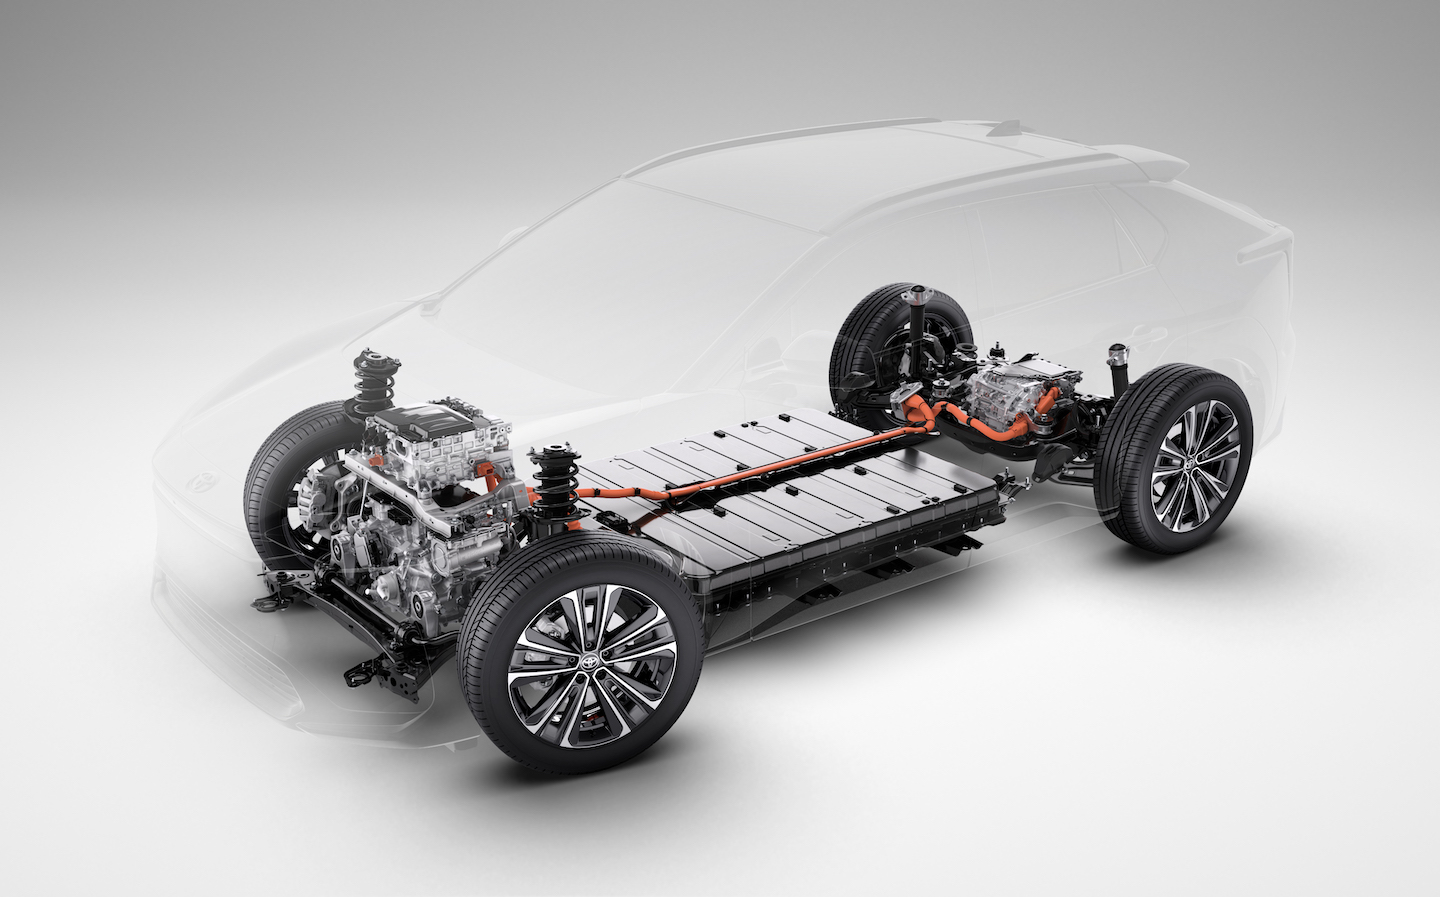 Toyota has revealed its first battery-electric model, the bZ4X SUV